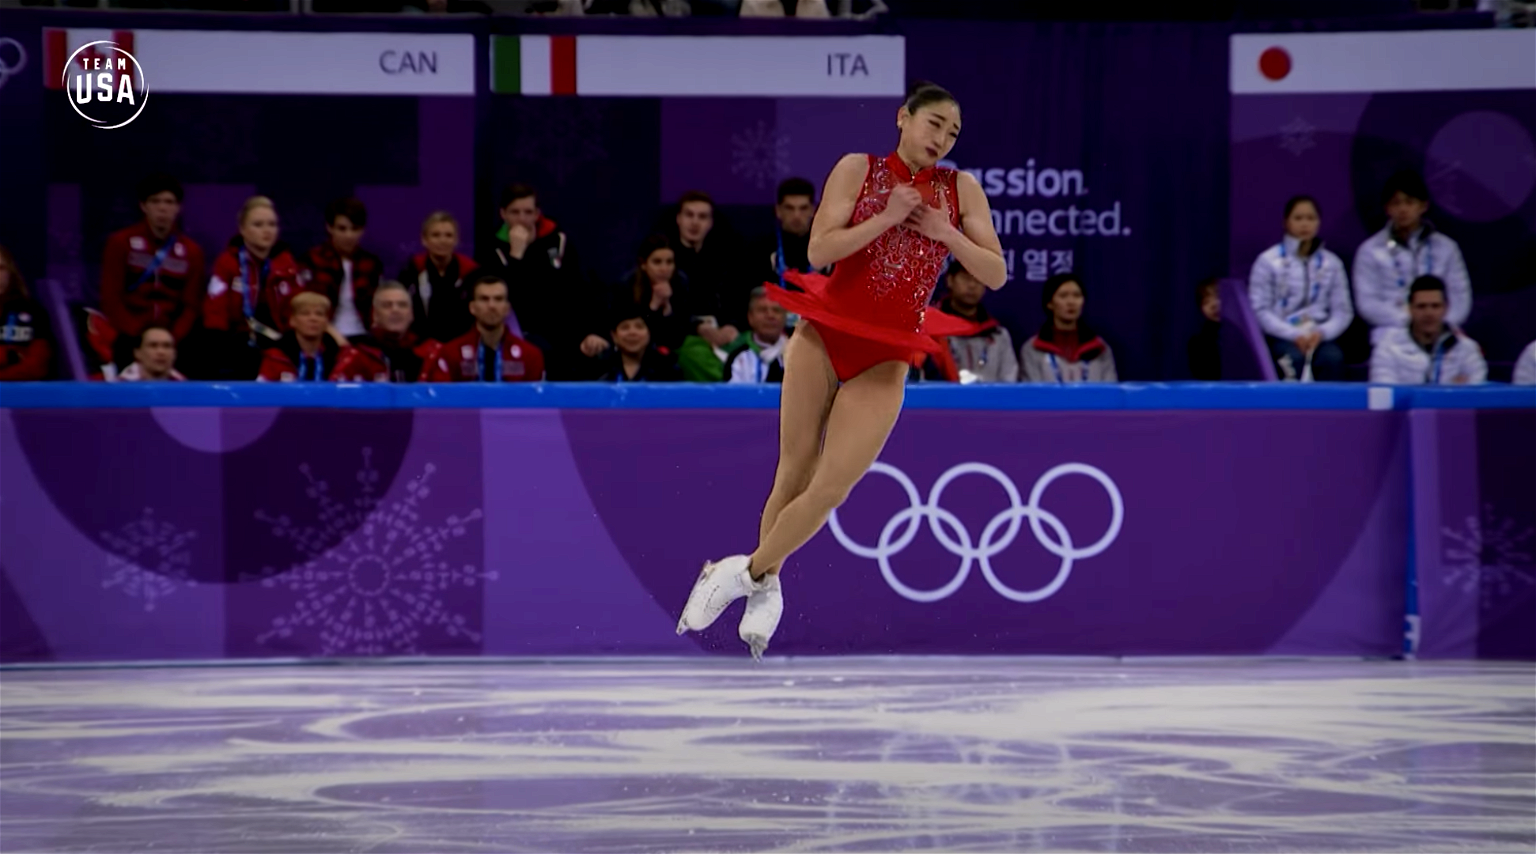 Mirai Nagasu Becomes the First American Woman to Land a Triple Axel at the Olympics